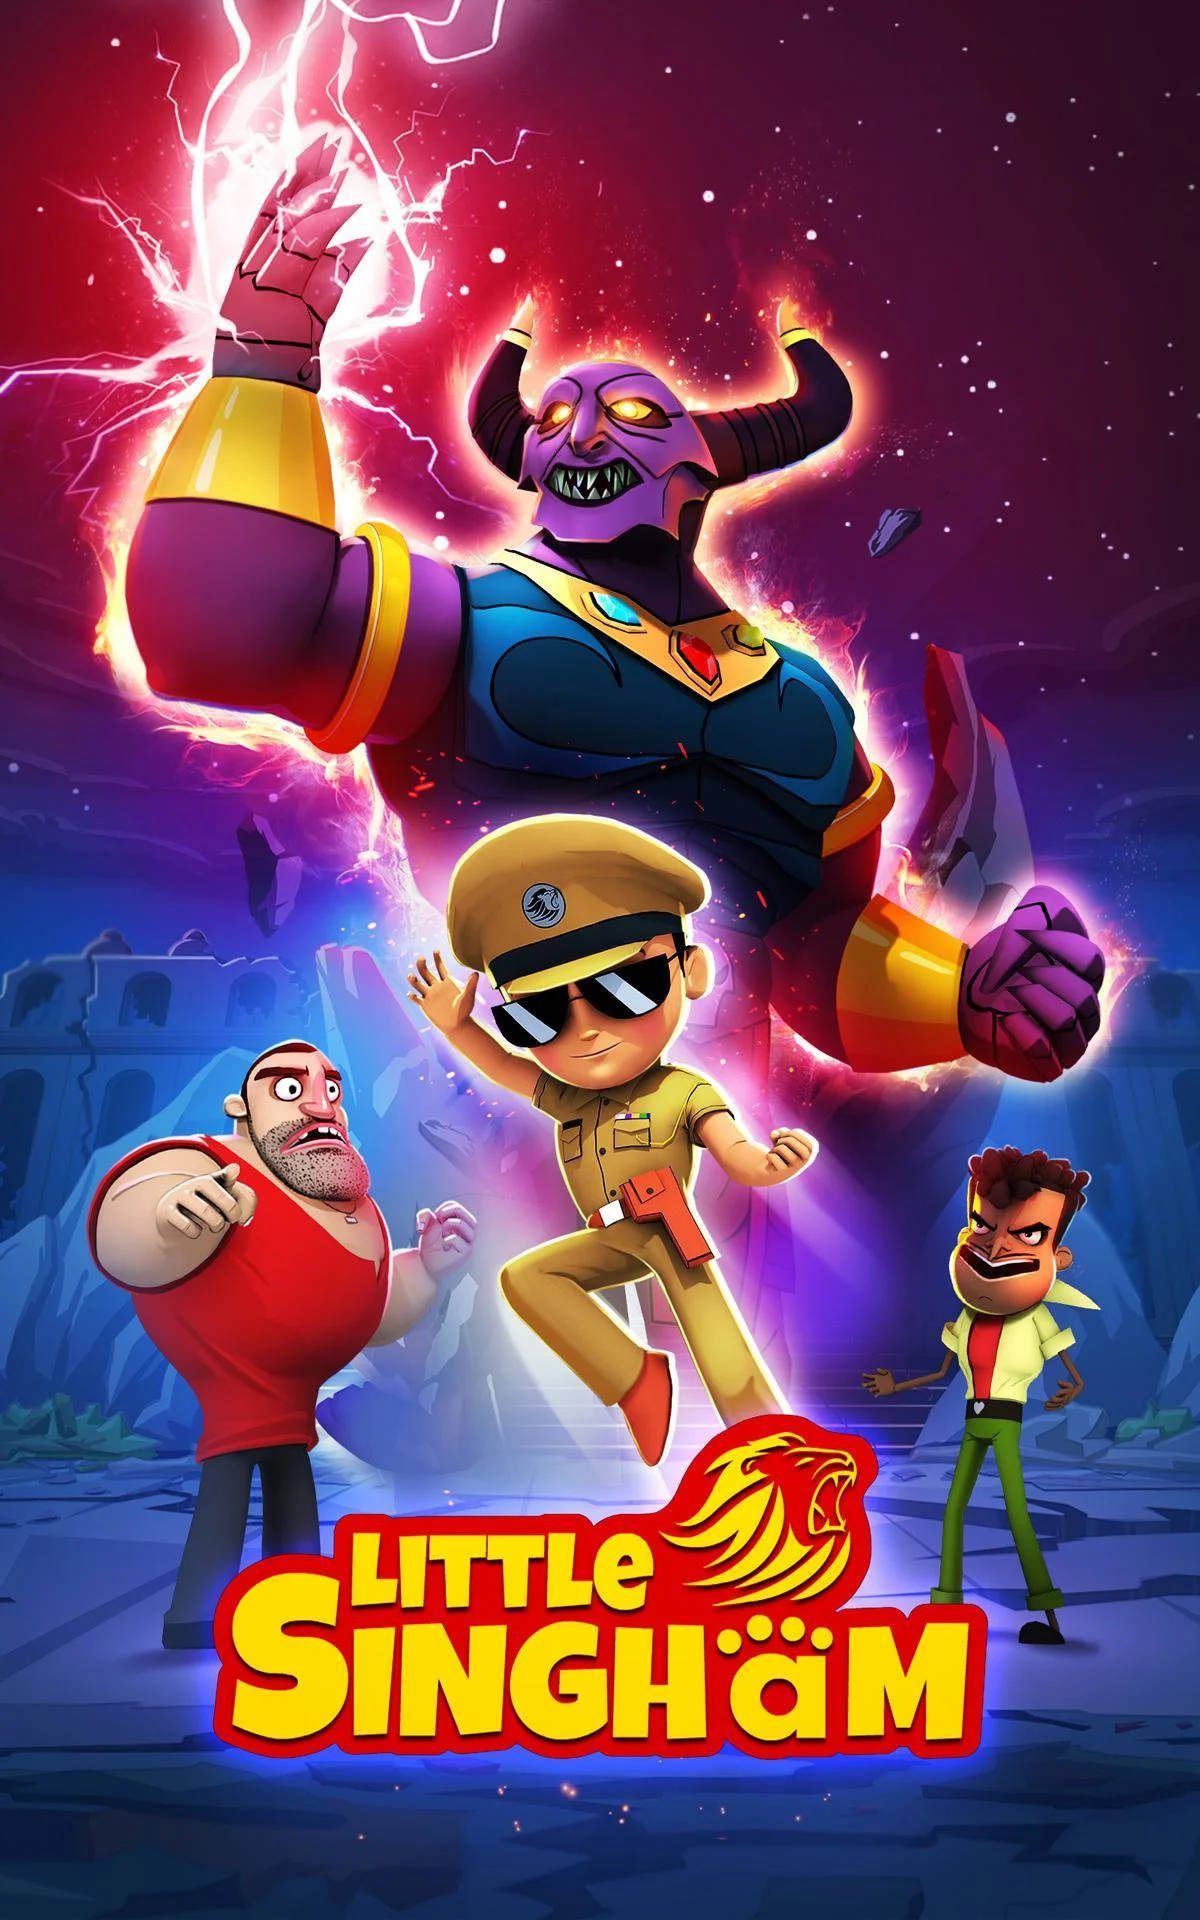 Little Singham Video Game Poster Background